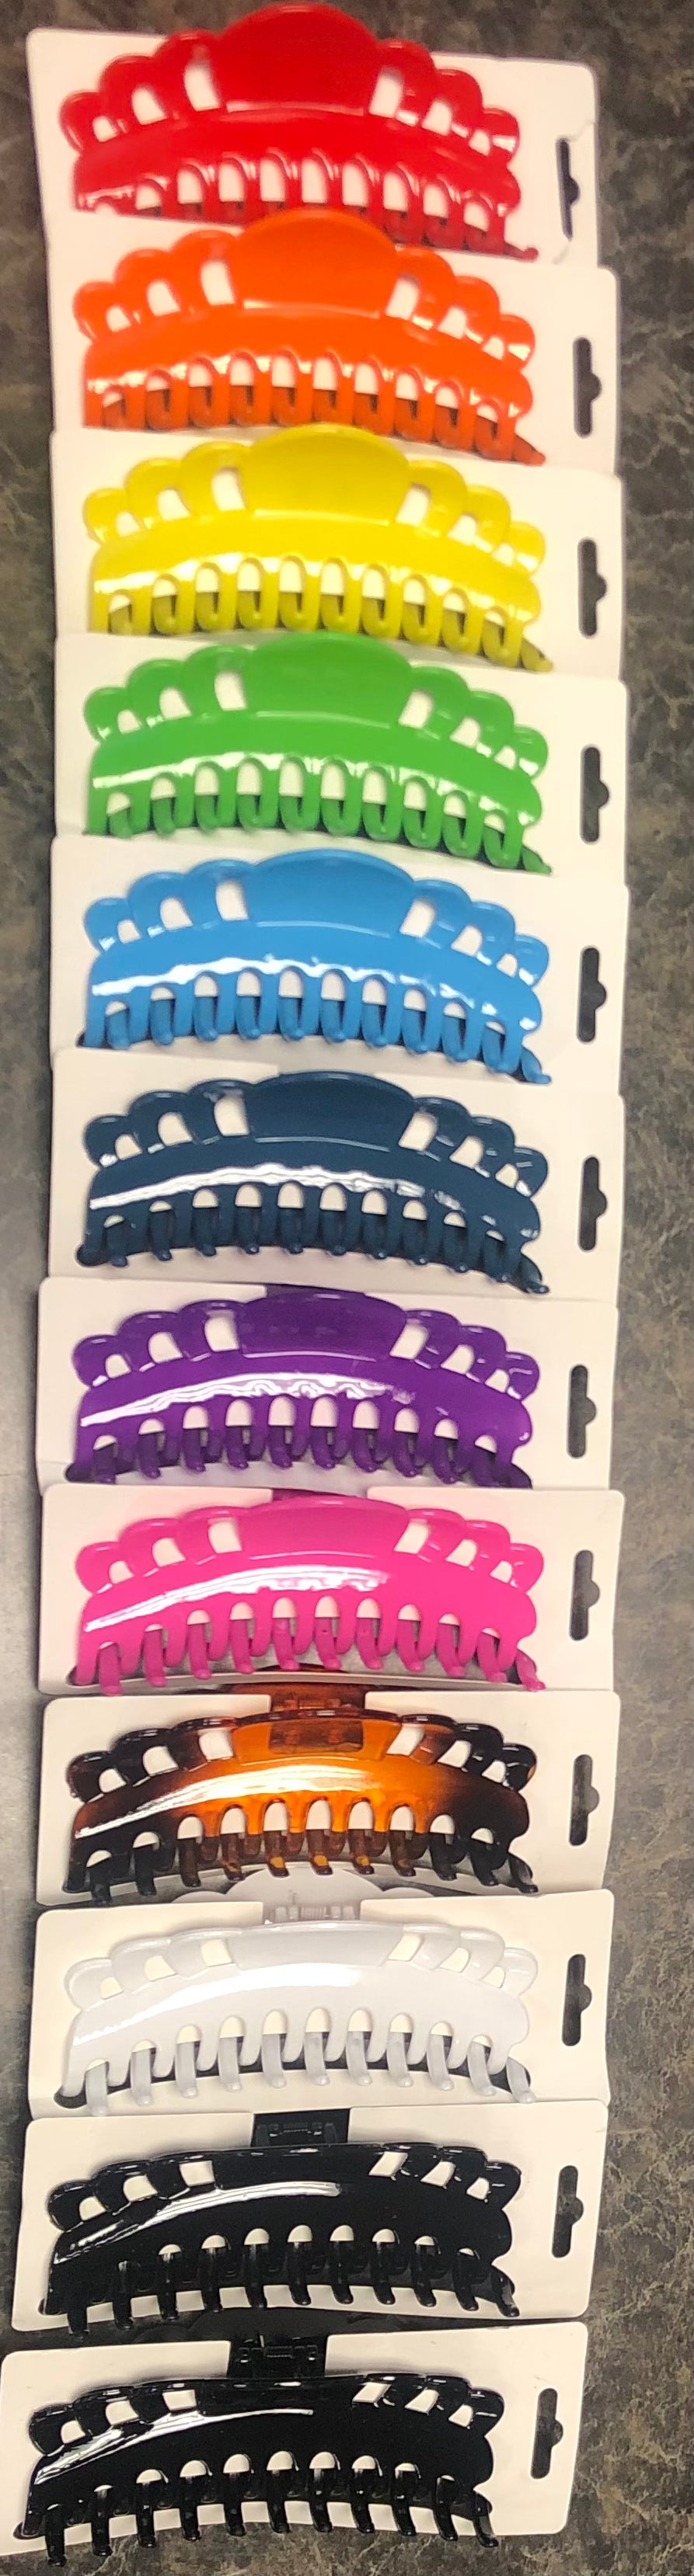 Hair Accessories - Tam's Beauty Supply 